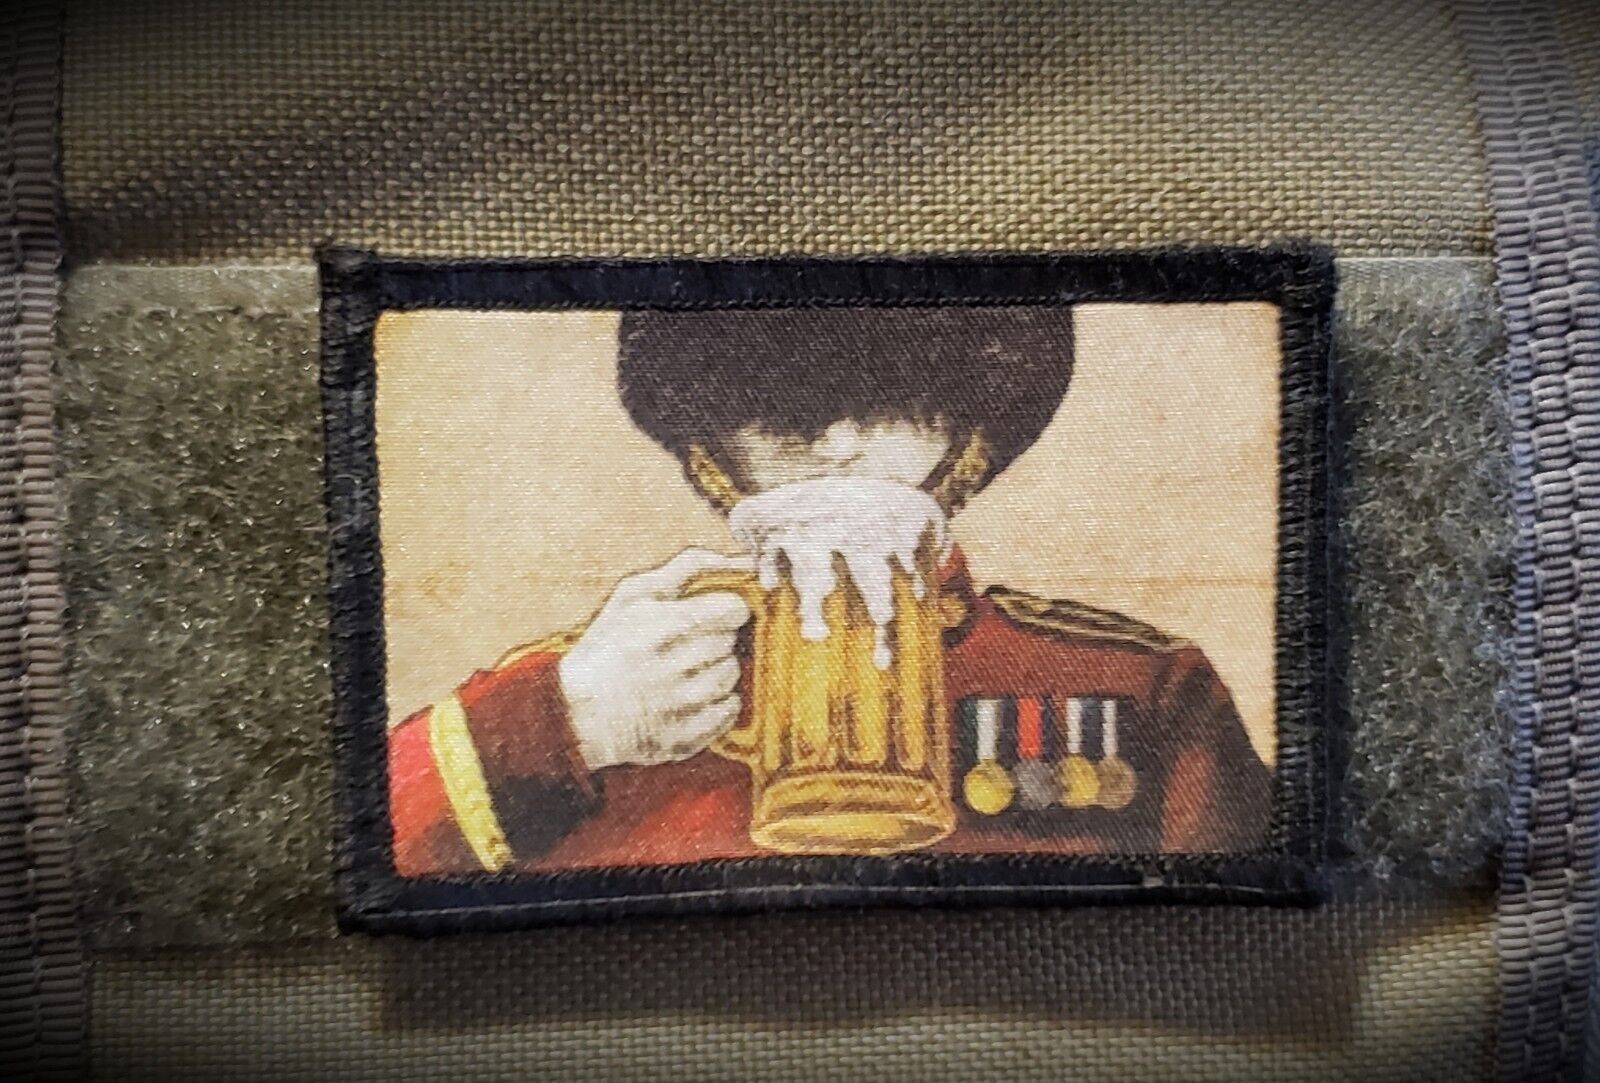 British Redcoat Drinking Beer Morale Patch Tactical Military Army Badg Flag